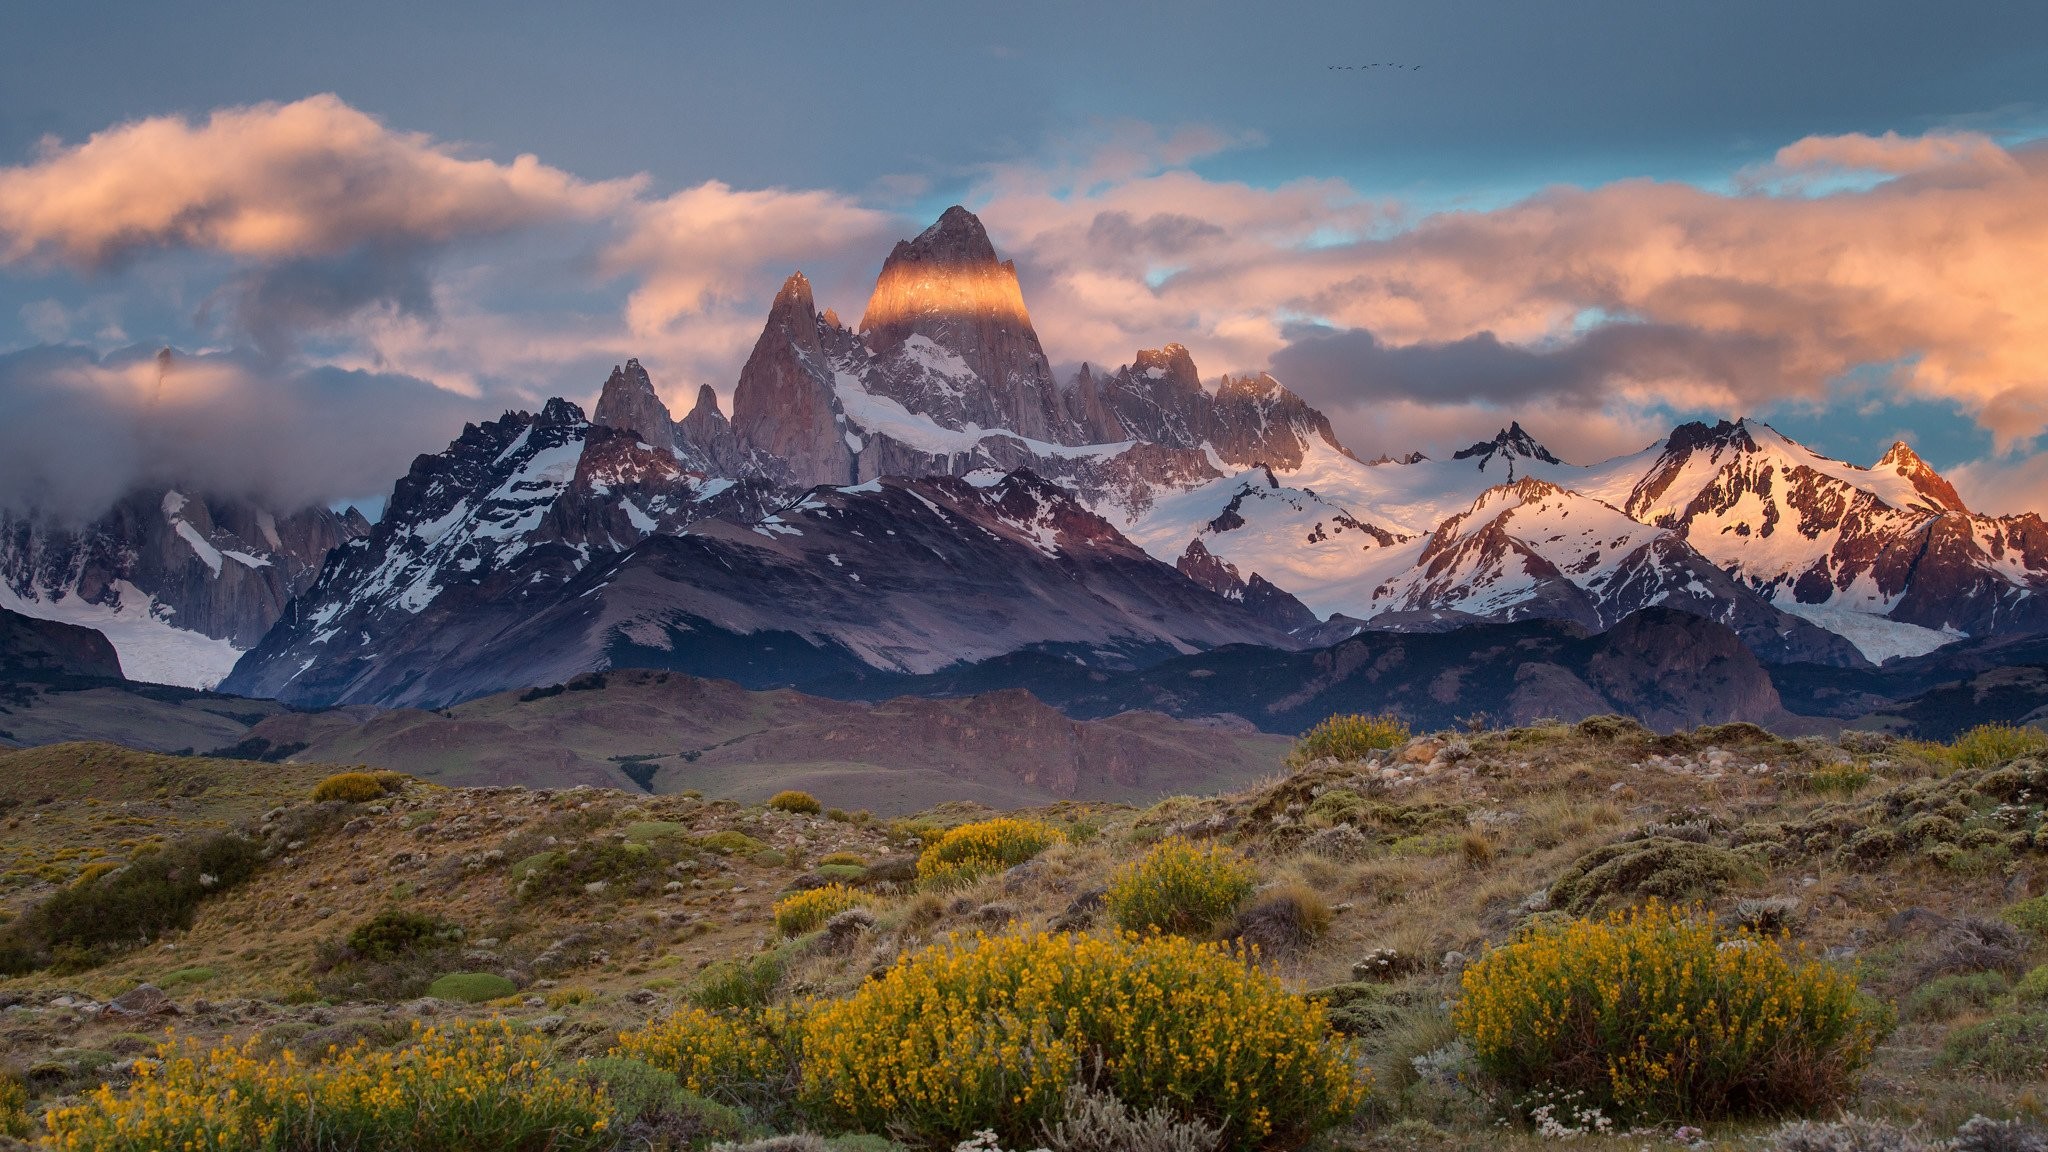 2048x1152 high definition,argentina, patagonia monte, mount, cool, desert, side,  fitz, chile, sight, mountain view,hd wallpaper, border, roy Wallpaper HD